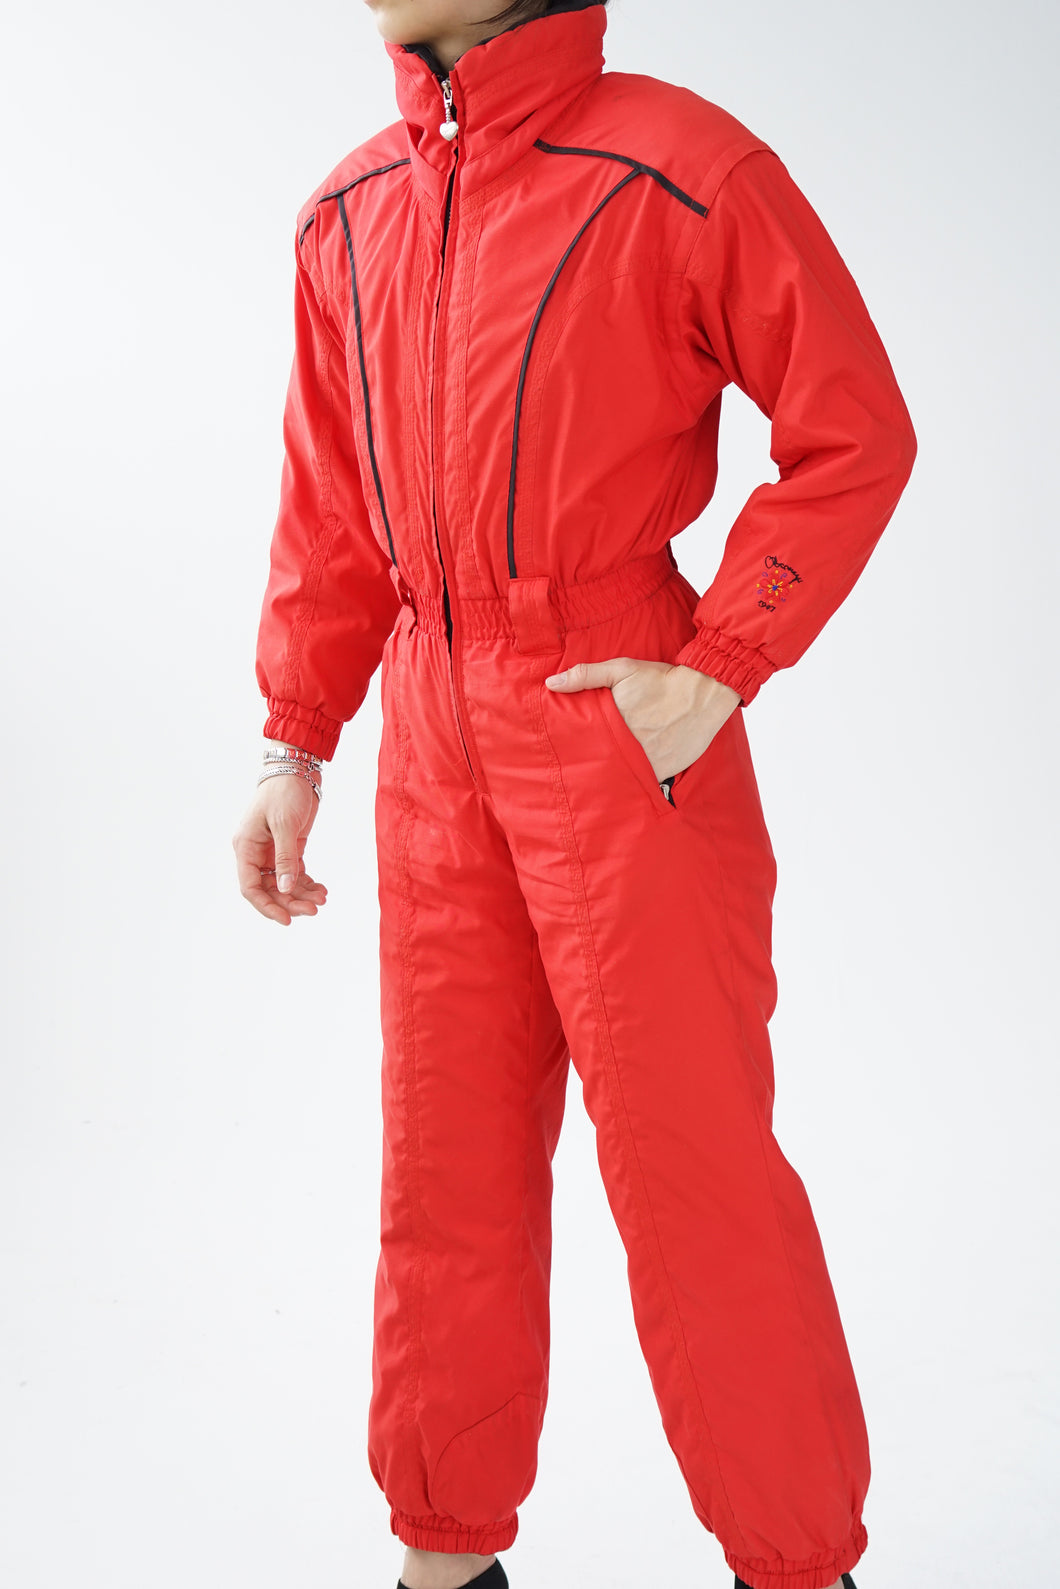 Vintage one piece Obermeyer ski suit, red snow suit for small women size 6